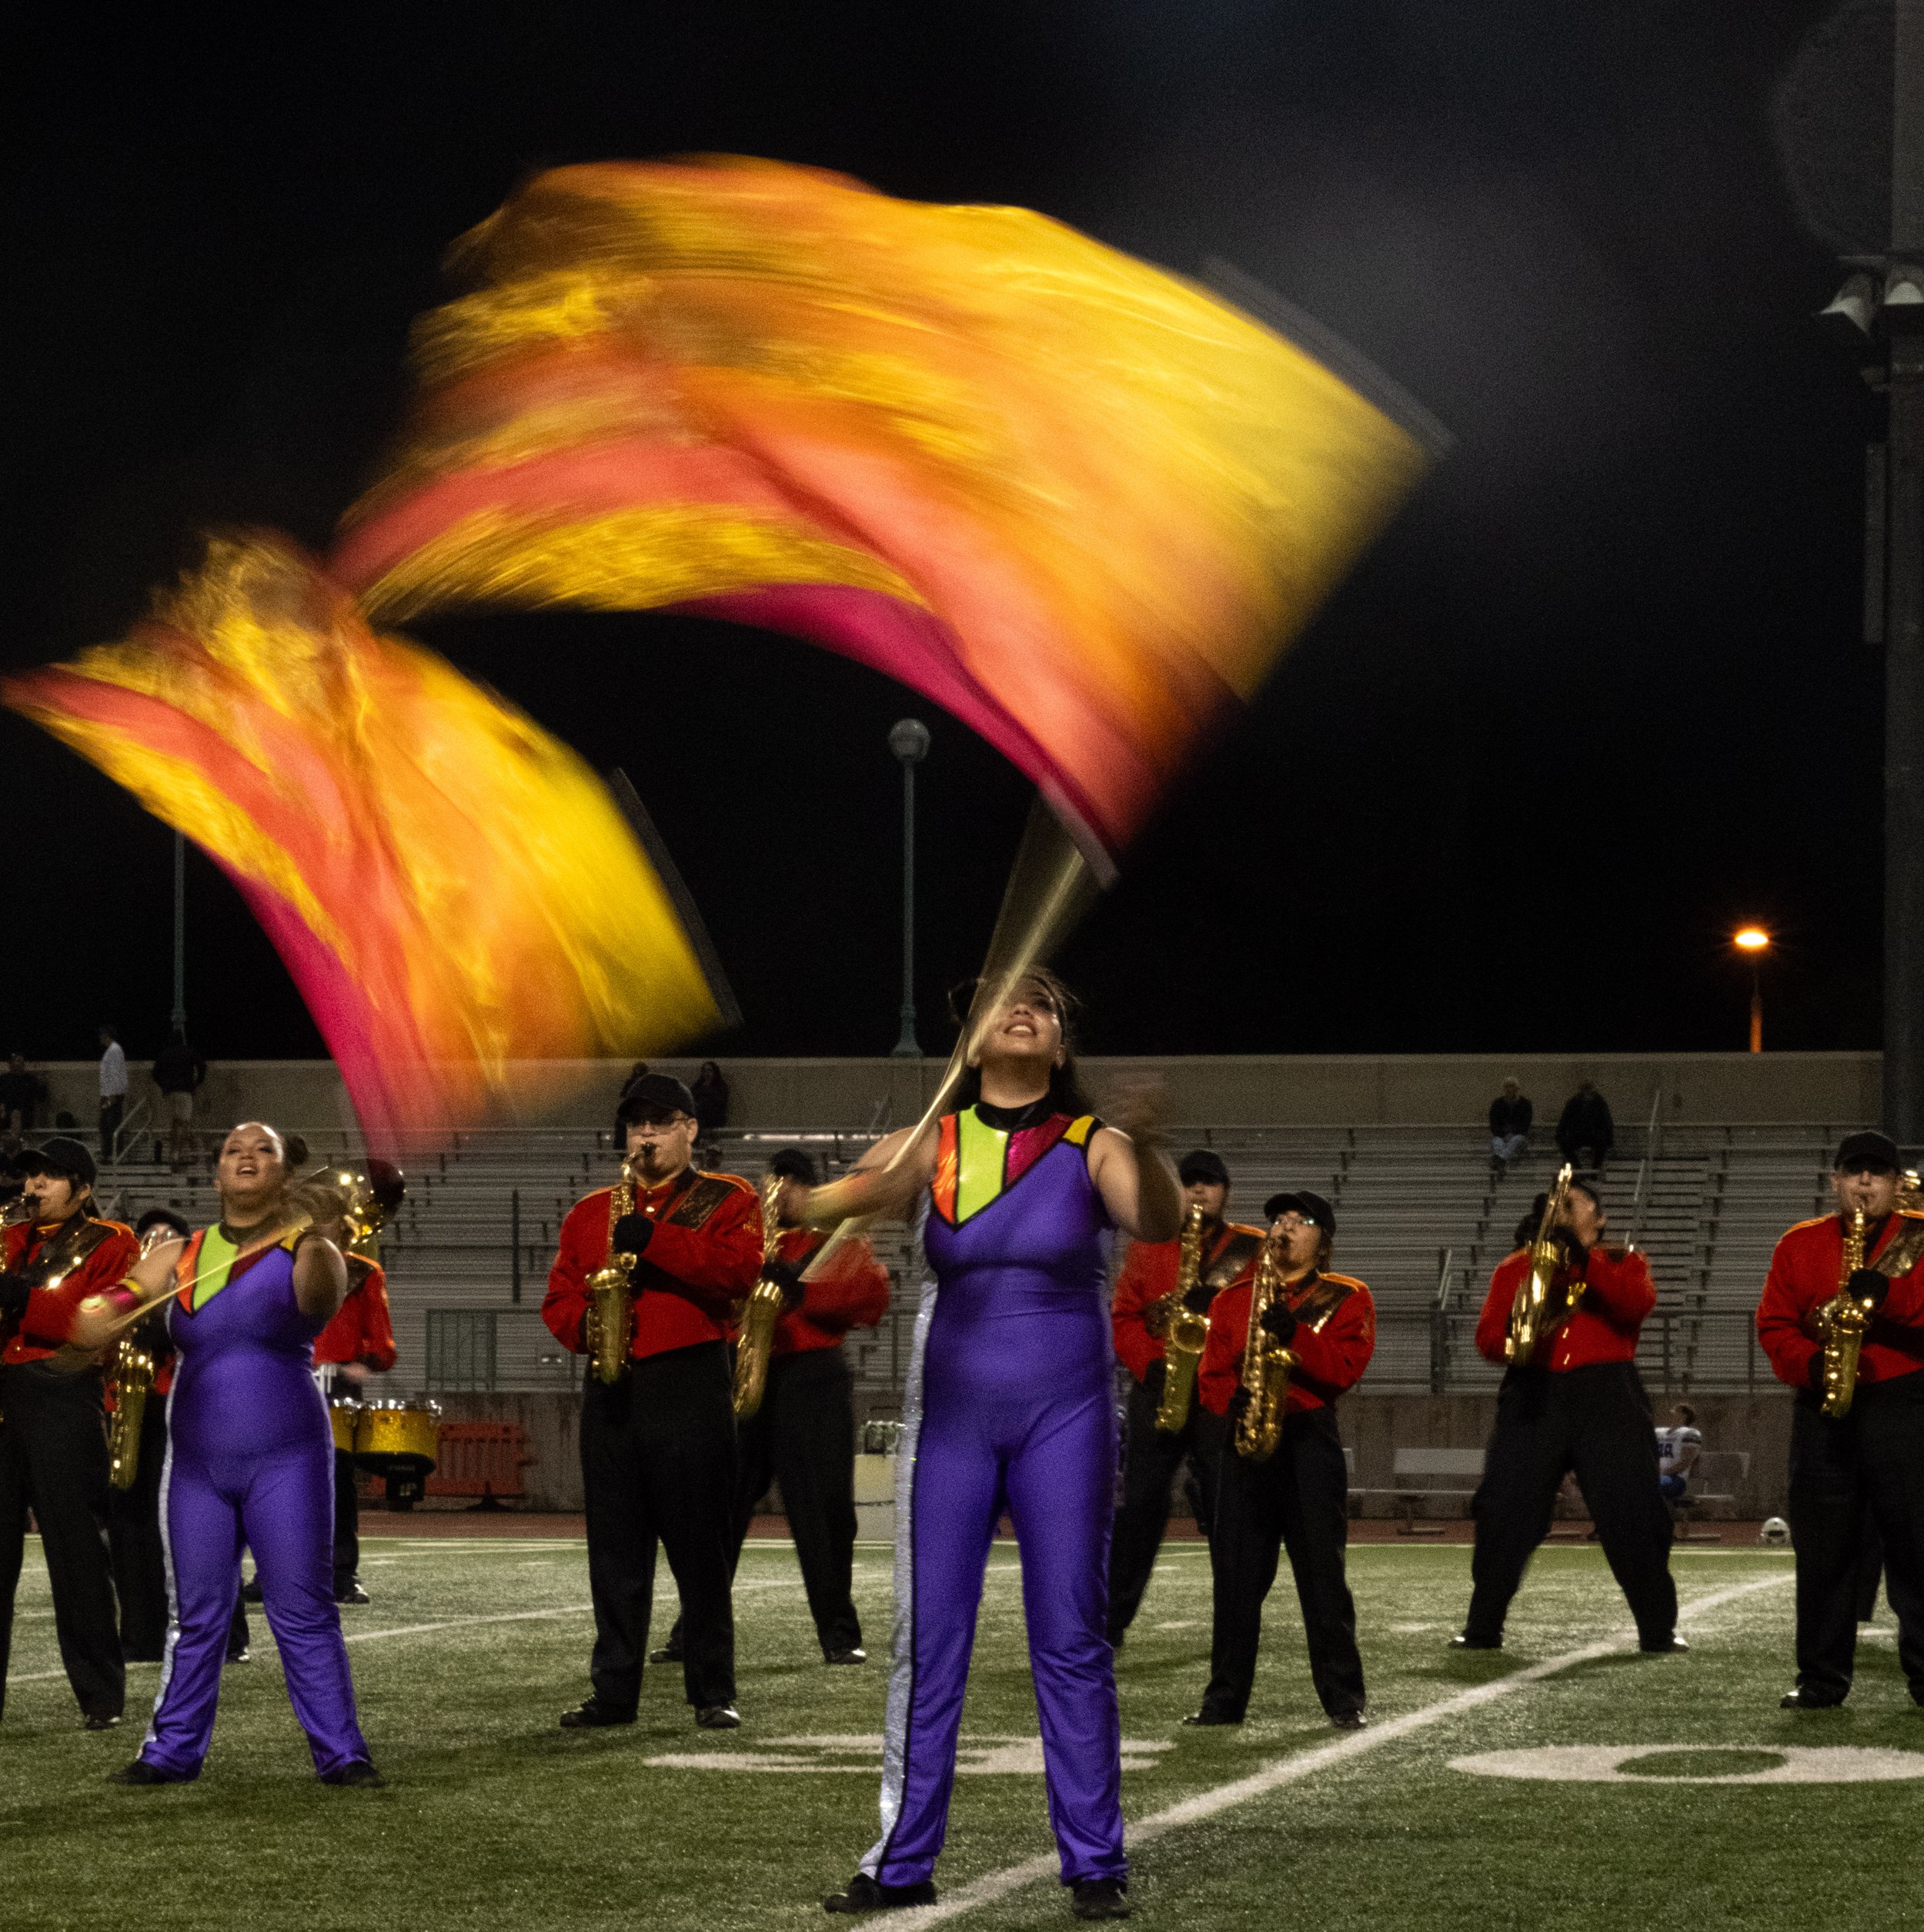  Pasadena City College(PCC) color gaurd throwing their flags during halftime at Robinson Stadium in PCC campus on Saturday, Oct. 14 Walnut, Calif. (Danilo Perez | The Corsair) 